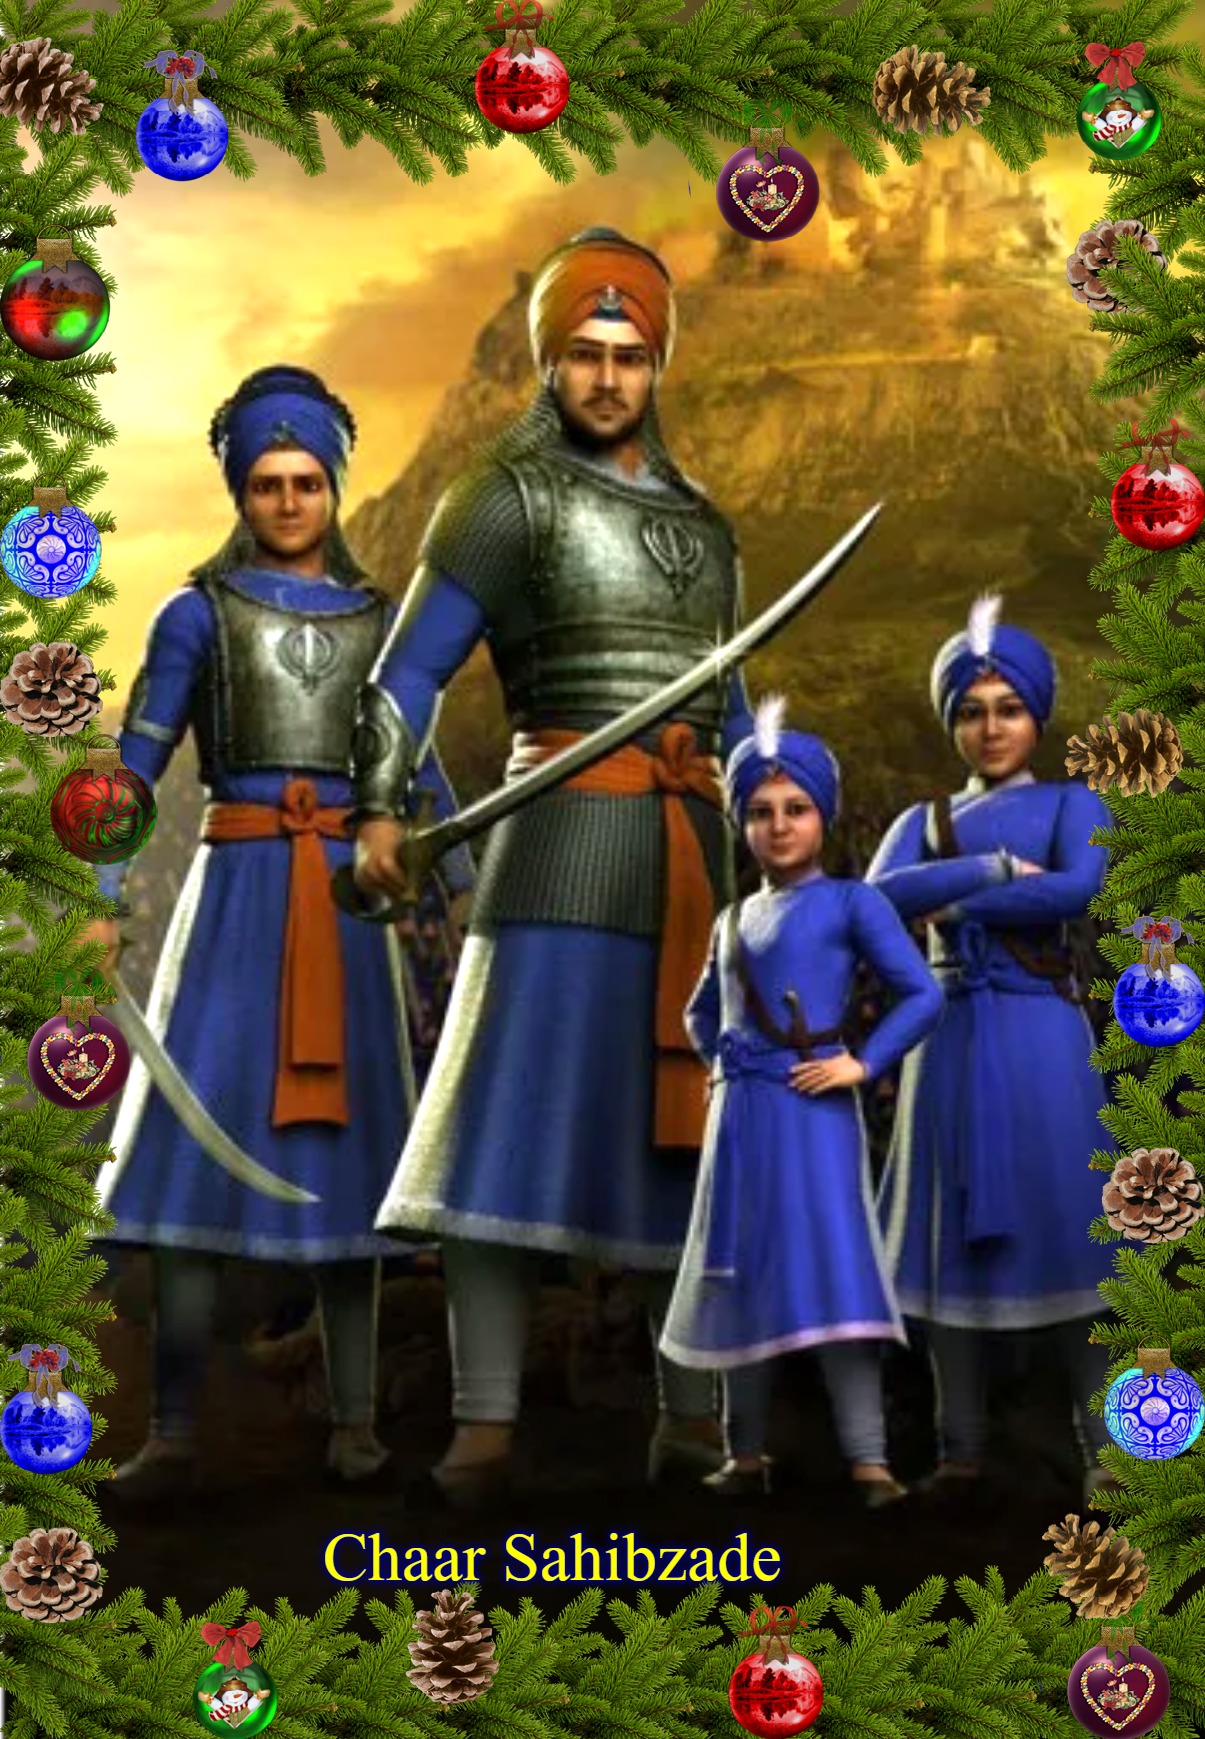 You are currently viewing “Martyrdom of Four Brave Sons of Guru Gobind Singh Ji”